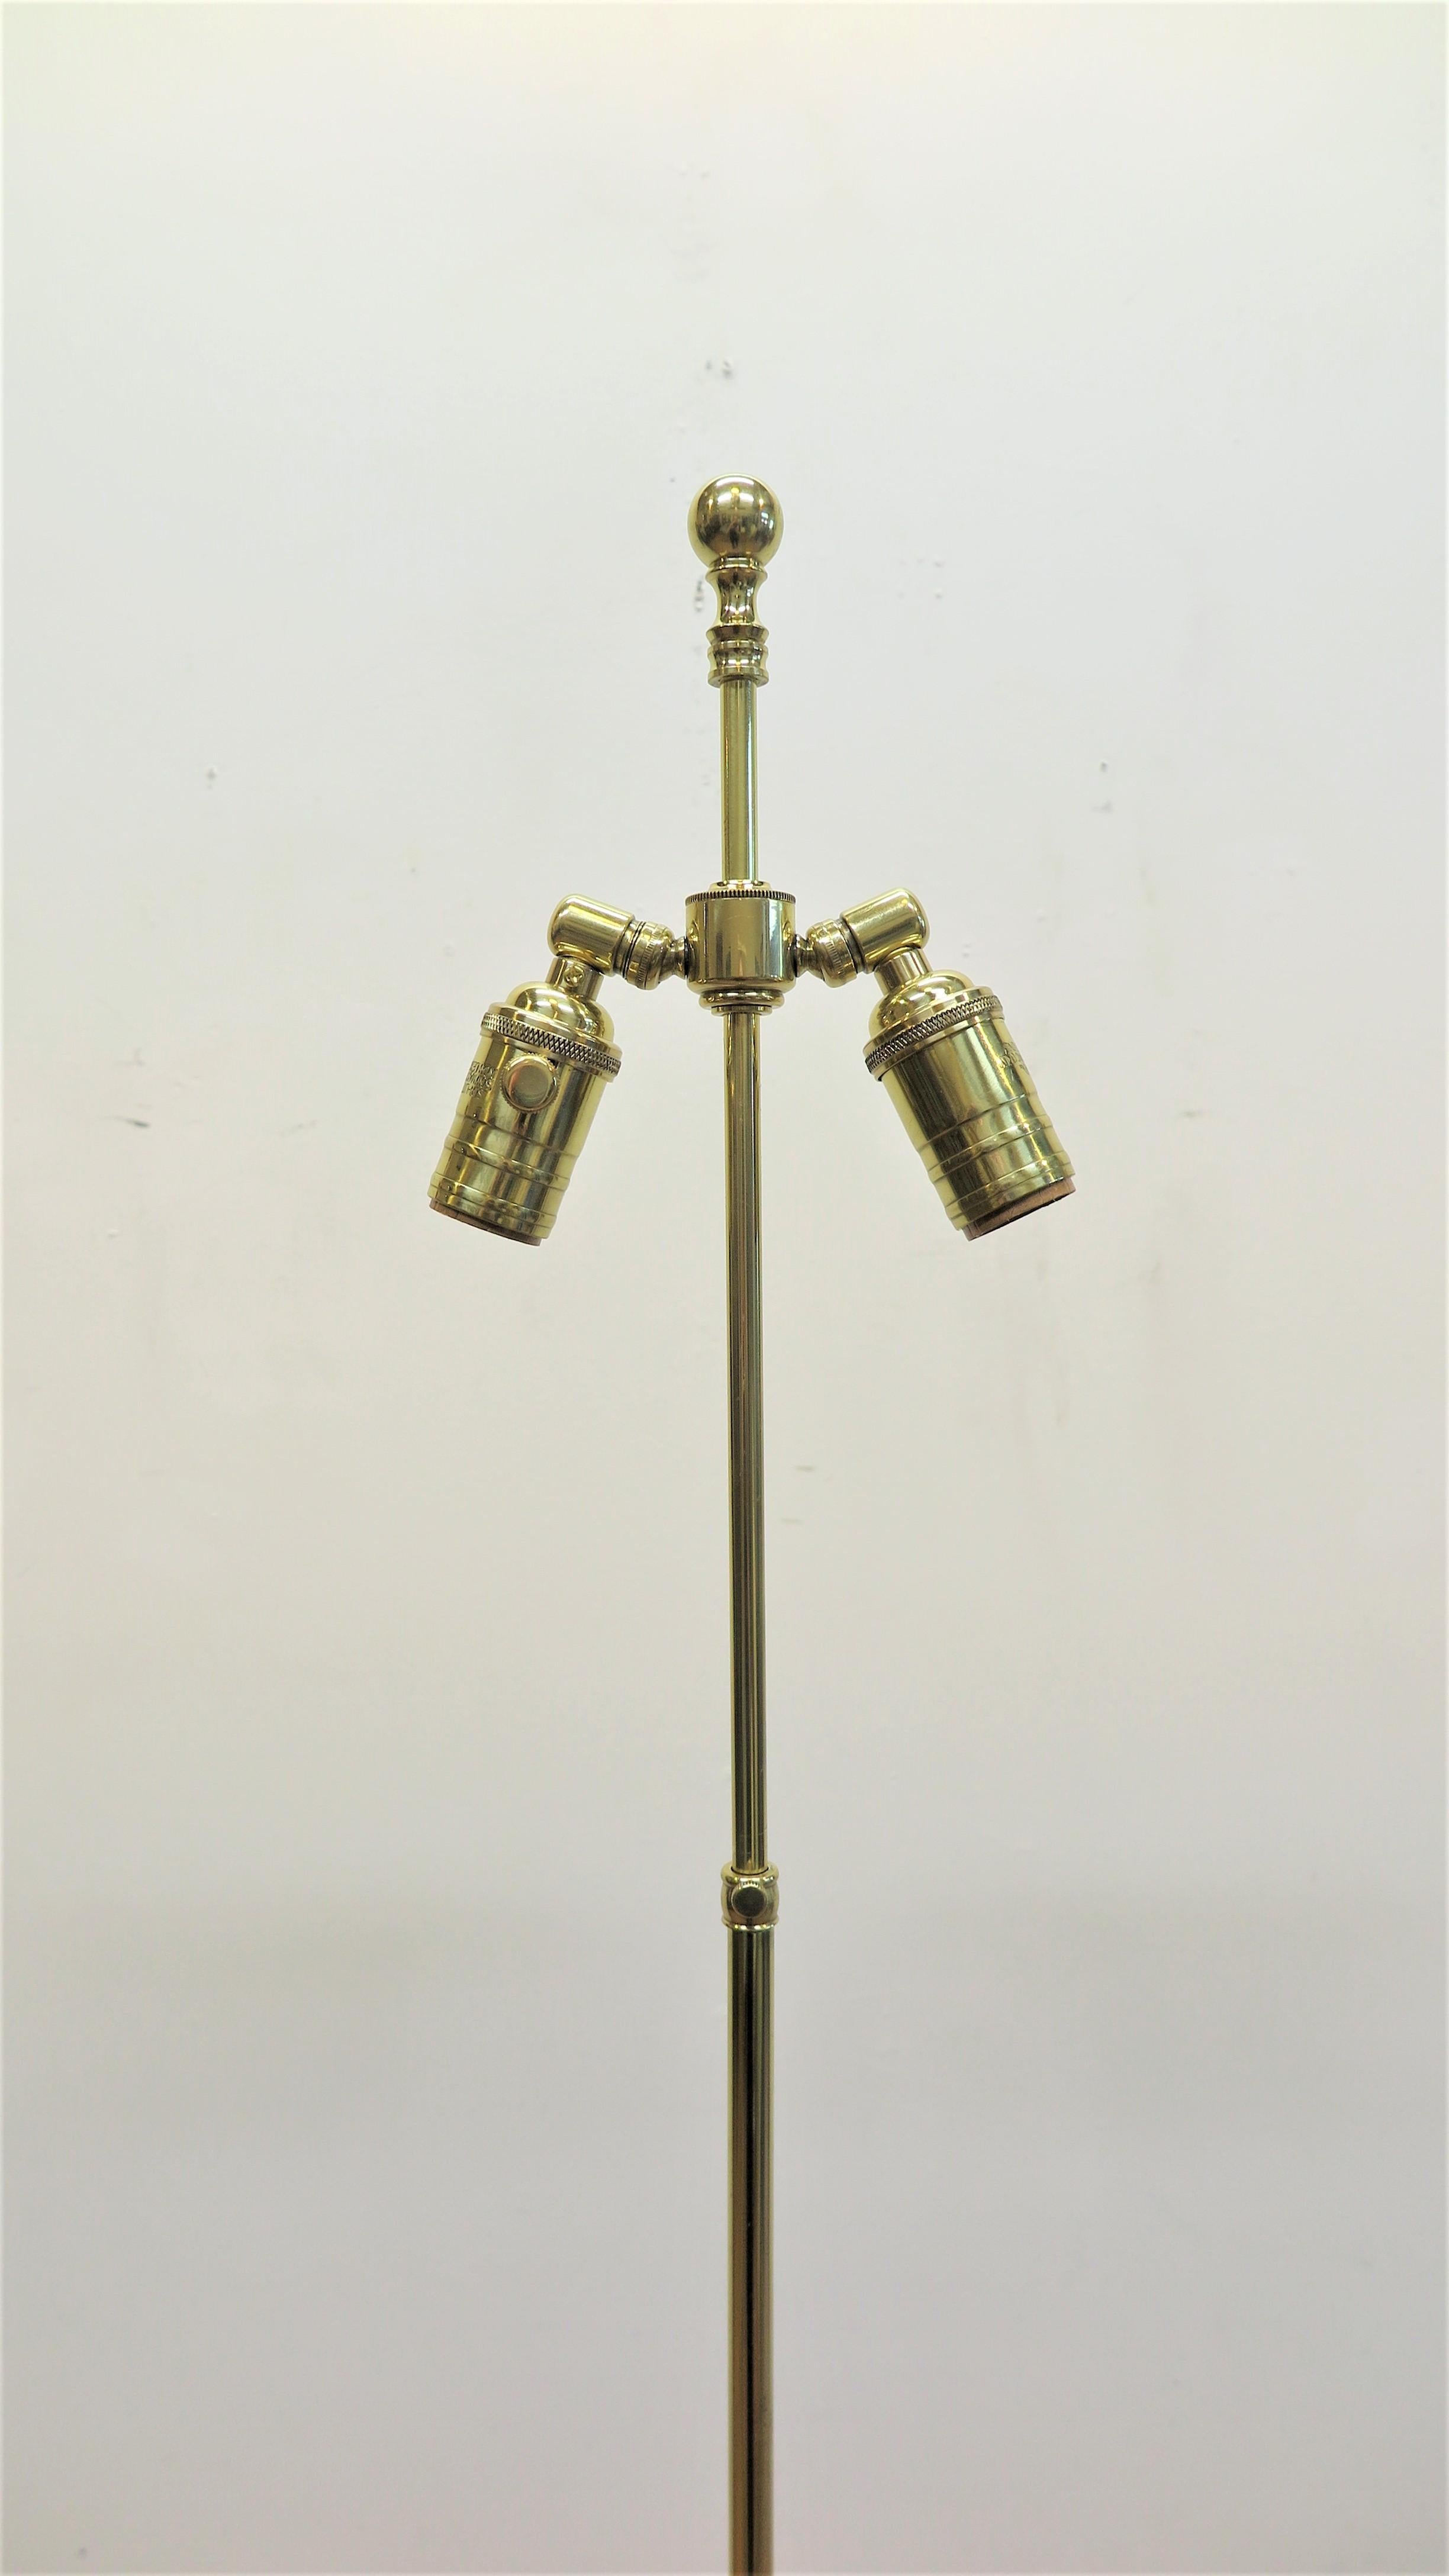 Albert Hadley Gilded Floor Lamp. Tripod adjustable gold leaf gilded floor lamp designed by Albert Hadley and Pairish Hadley Design. Pair available. These uncompleted Lamps where recovered from the closing of the metal fabricators. The bases and